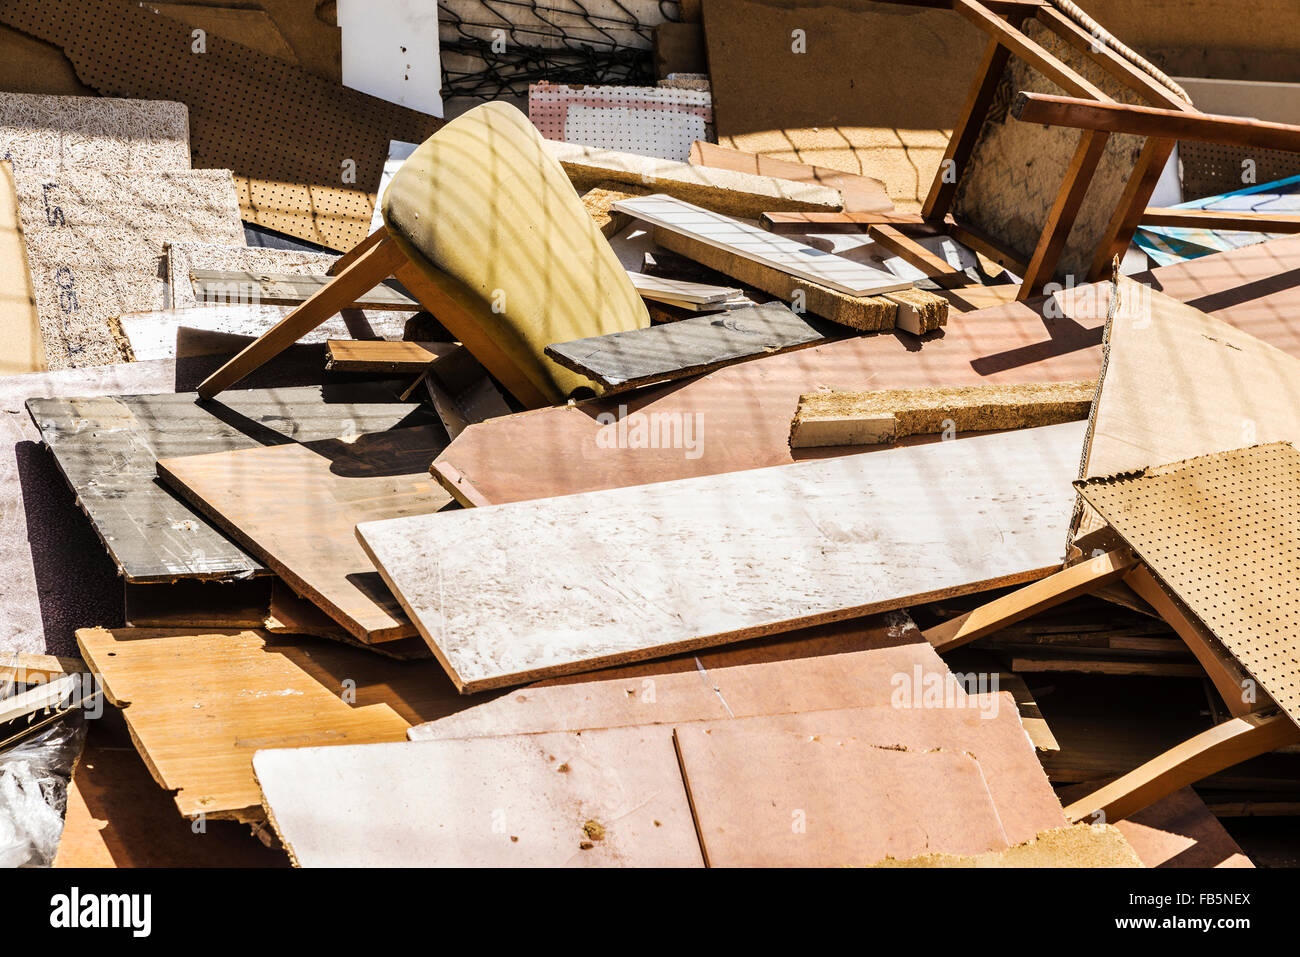 Lots of old wood, chairs, planks and rubble Stock Photo